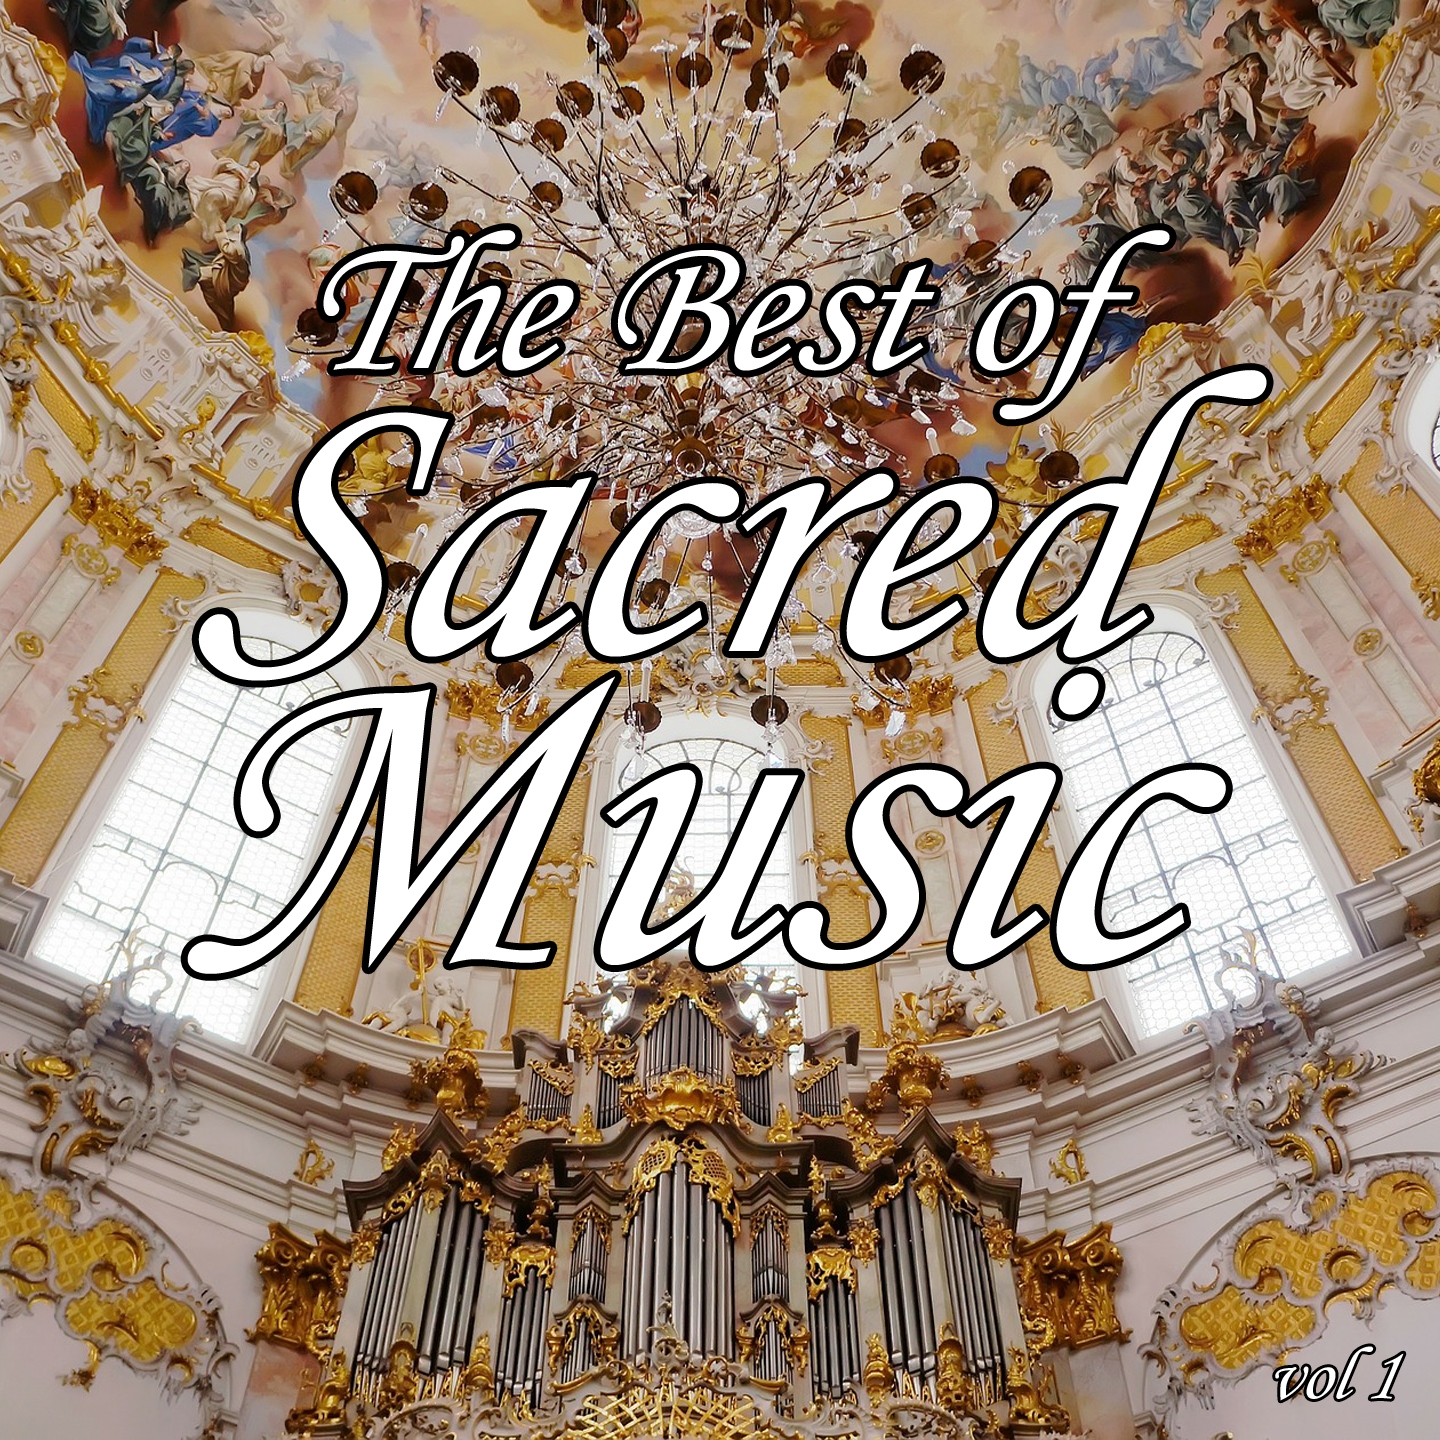 The Best of Sacred Music, Vol. 1